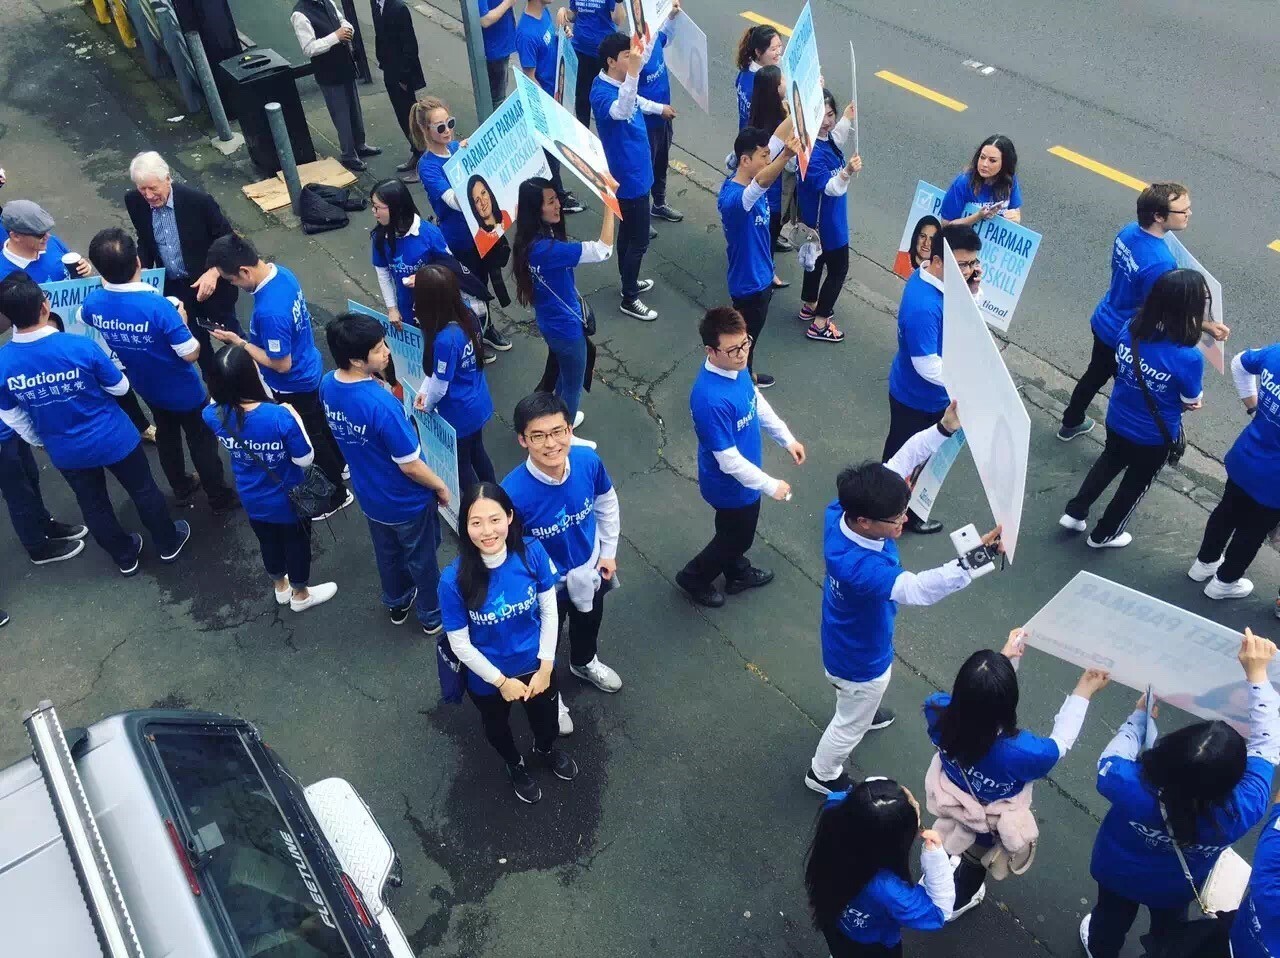 The Blue Dragons – a group of Chinese-New Zealand supporters of the centre-right National Party. Photo: Facebook